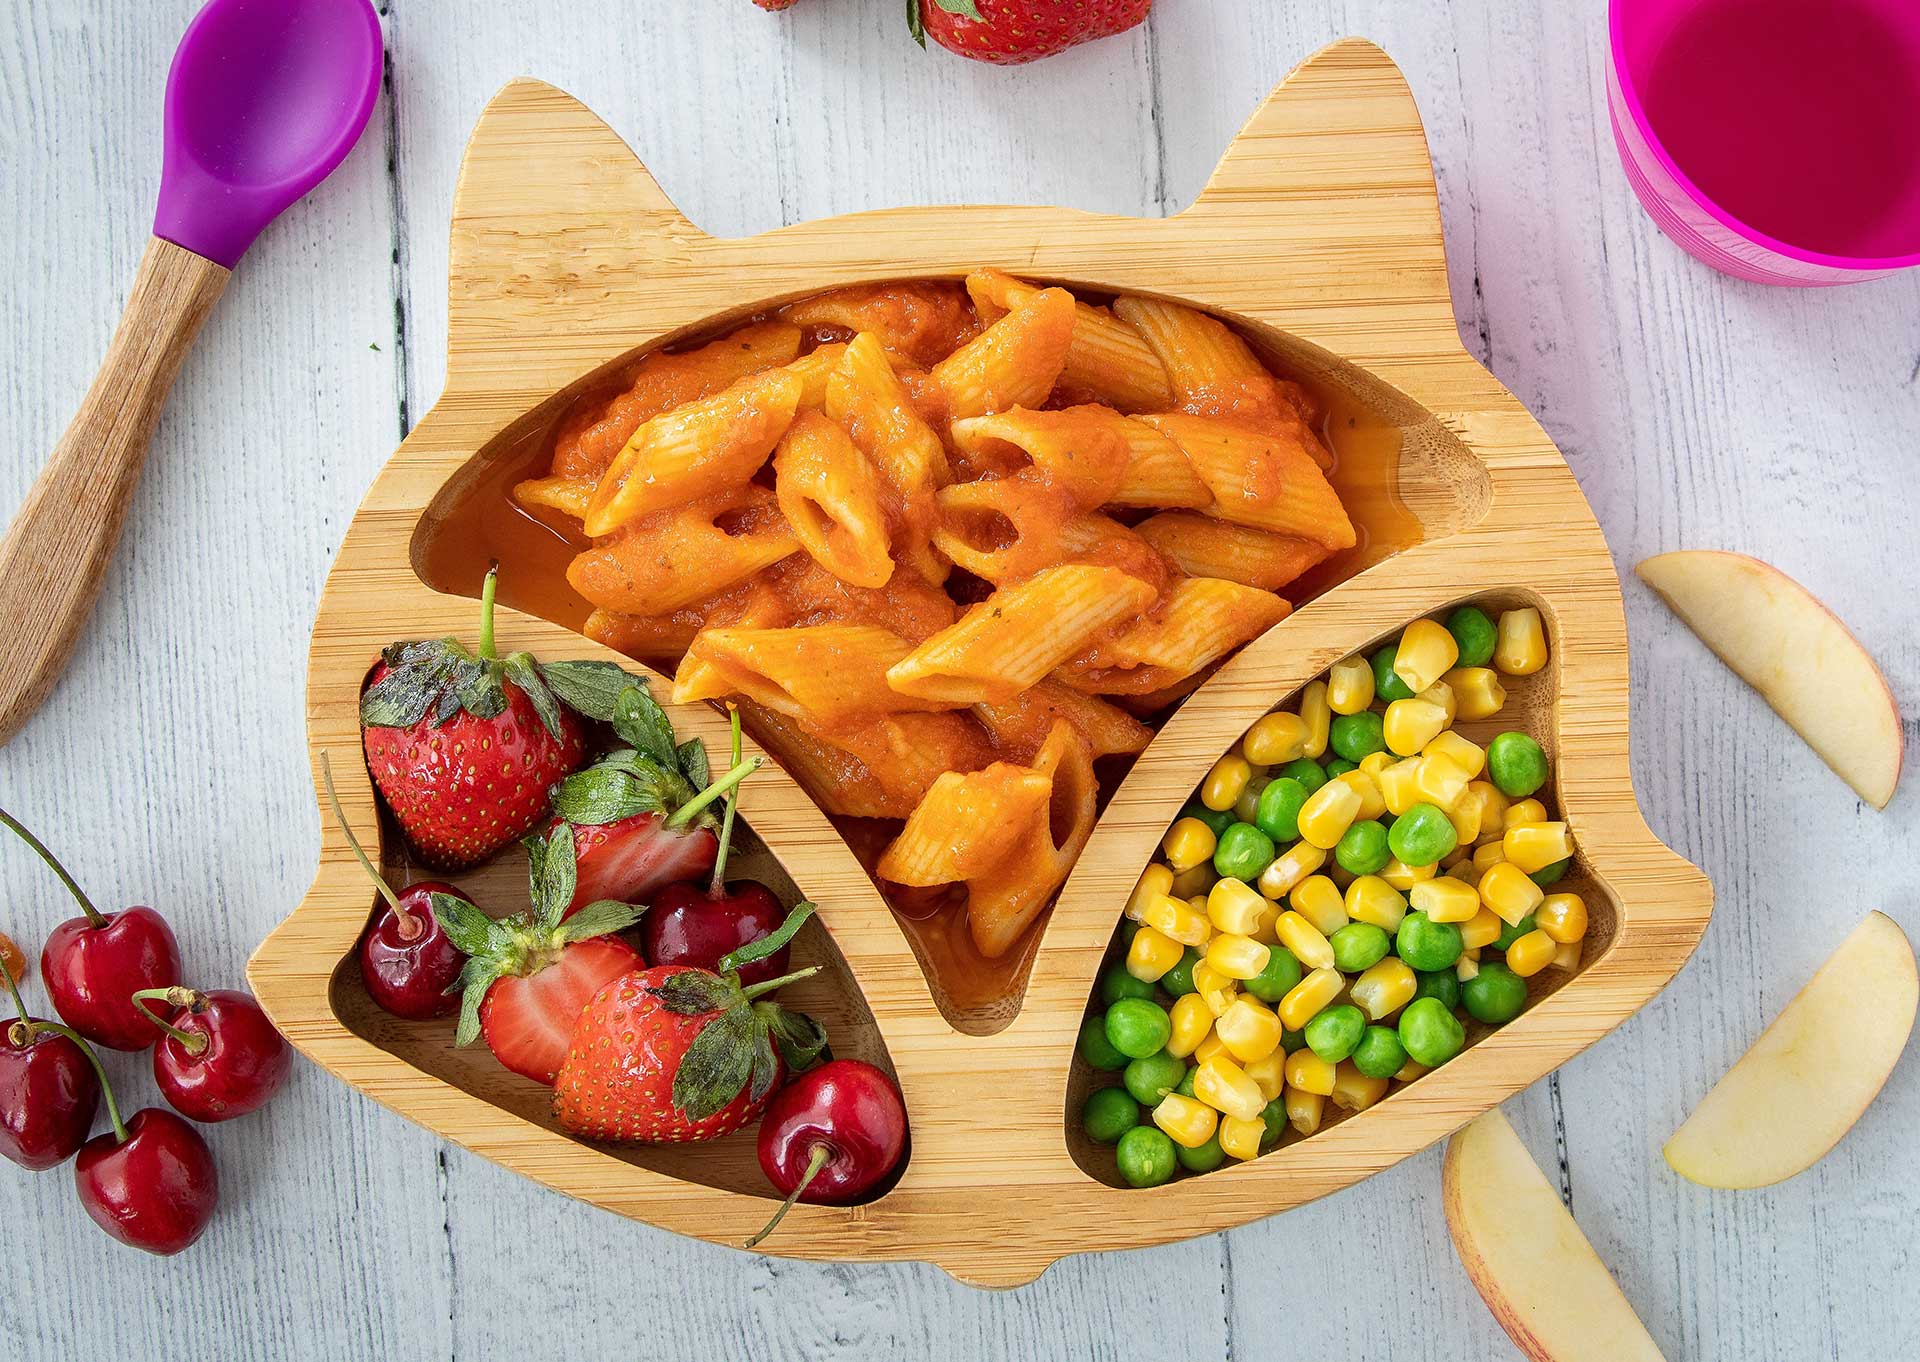 Quality Frozen Ready Meals for Kids